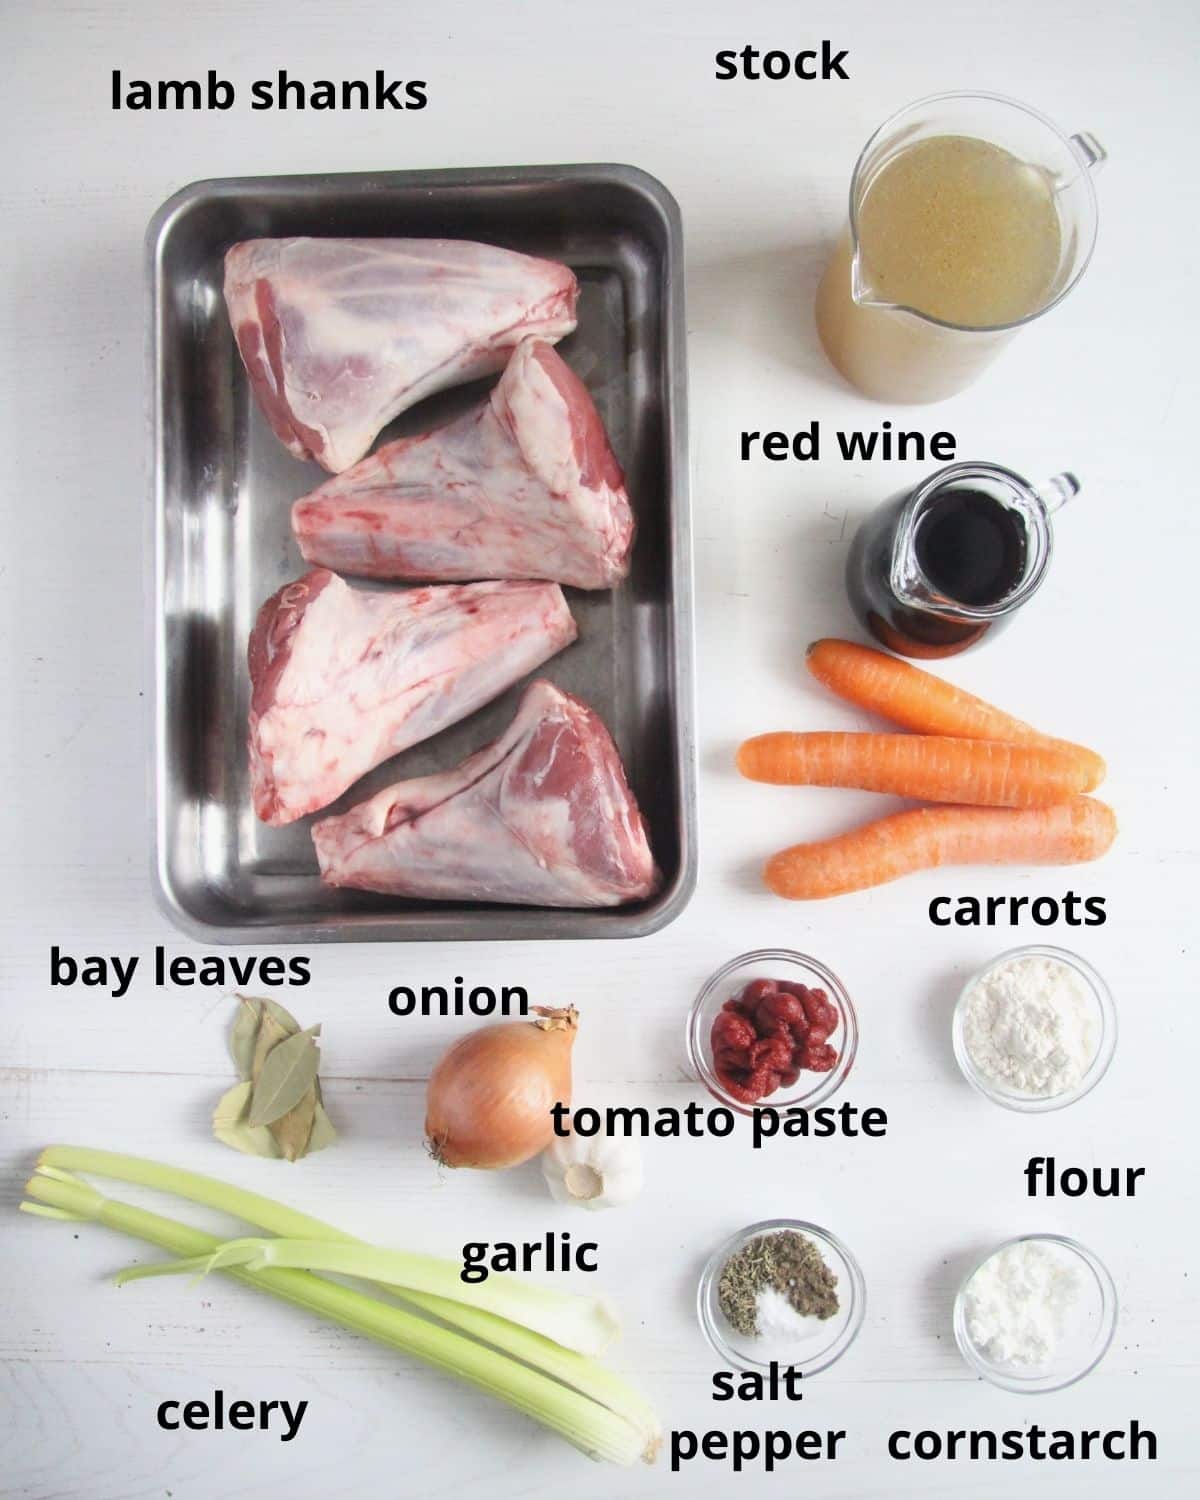 listed ingredients for cooking lamb shanks in the crockpot.